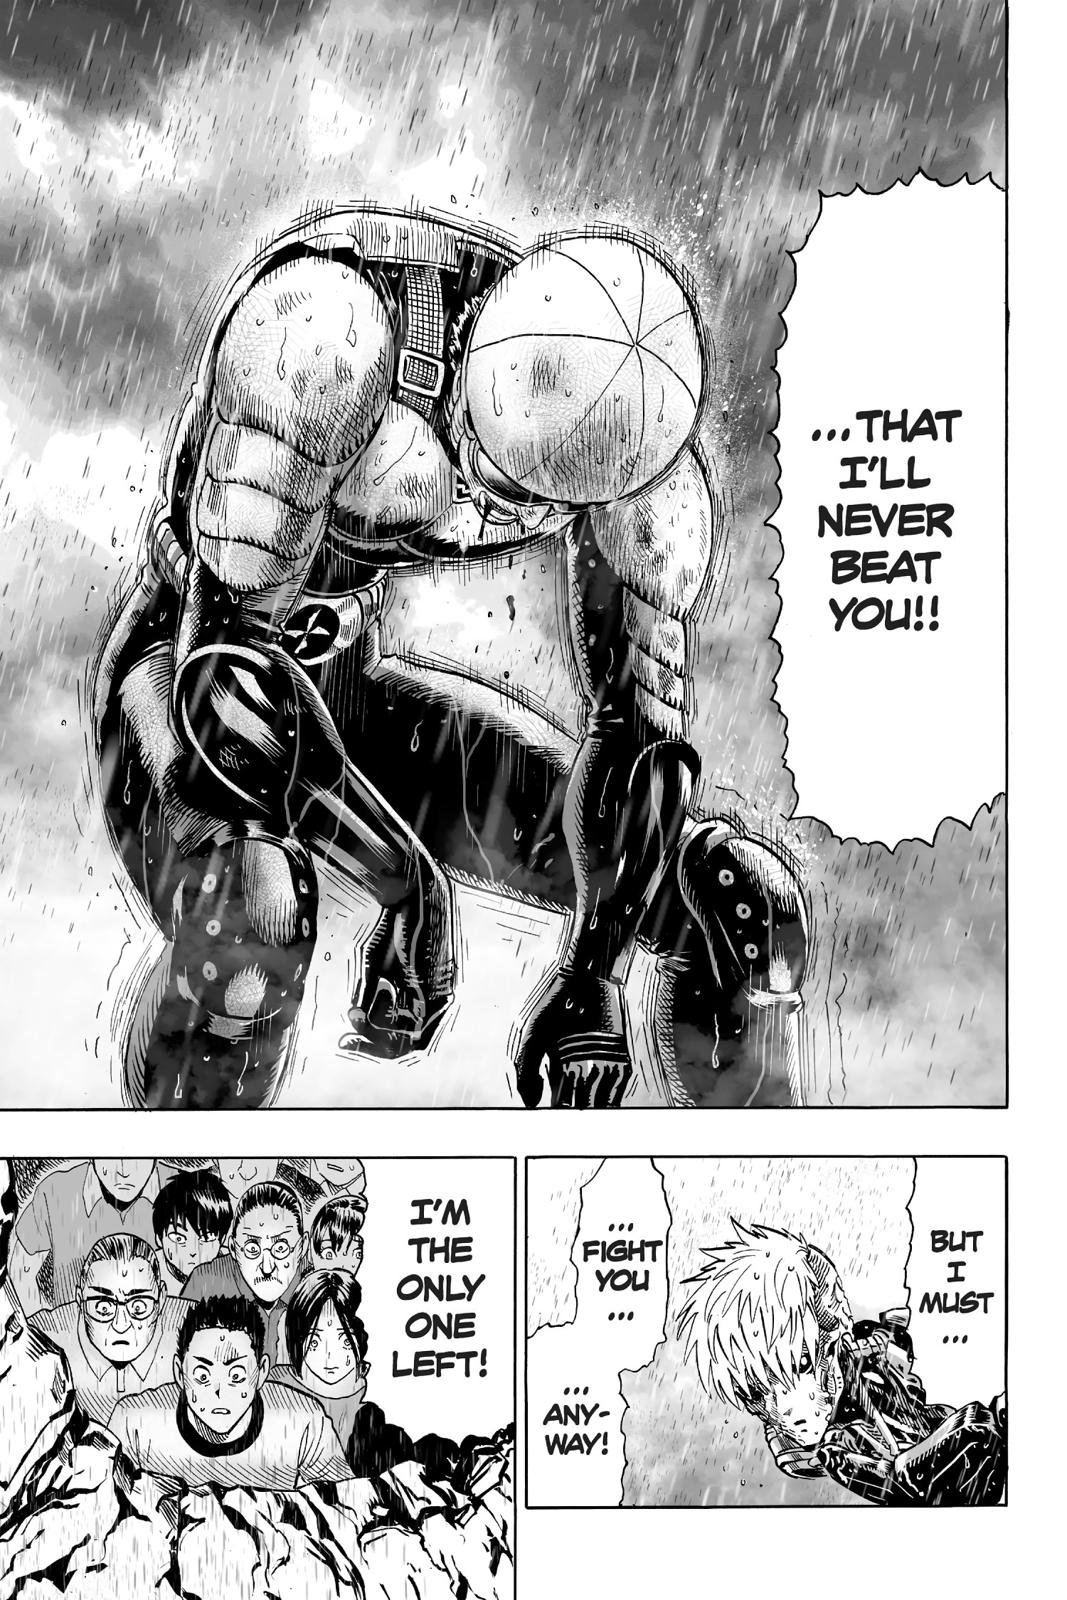 One-Punch Man, Punch 27 image 18